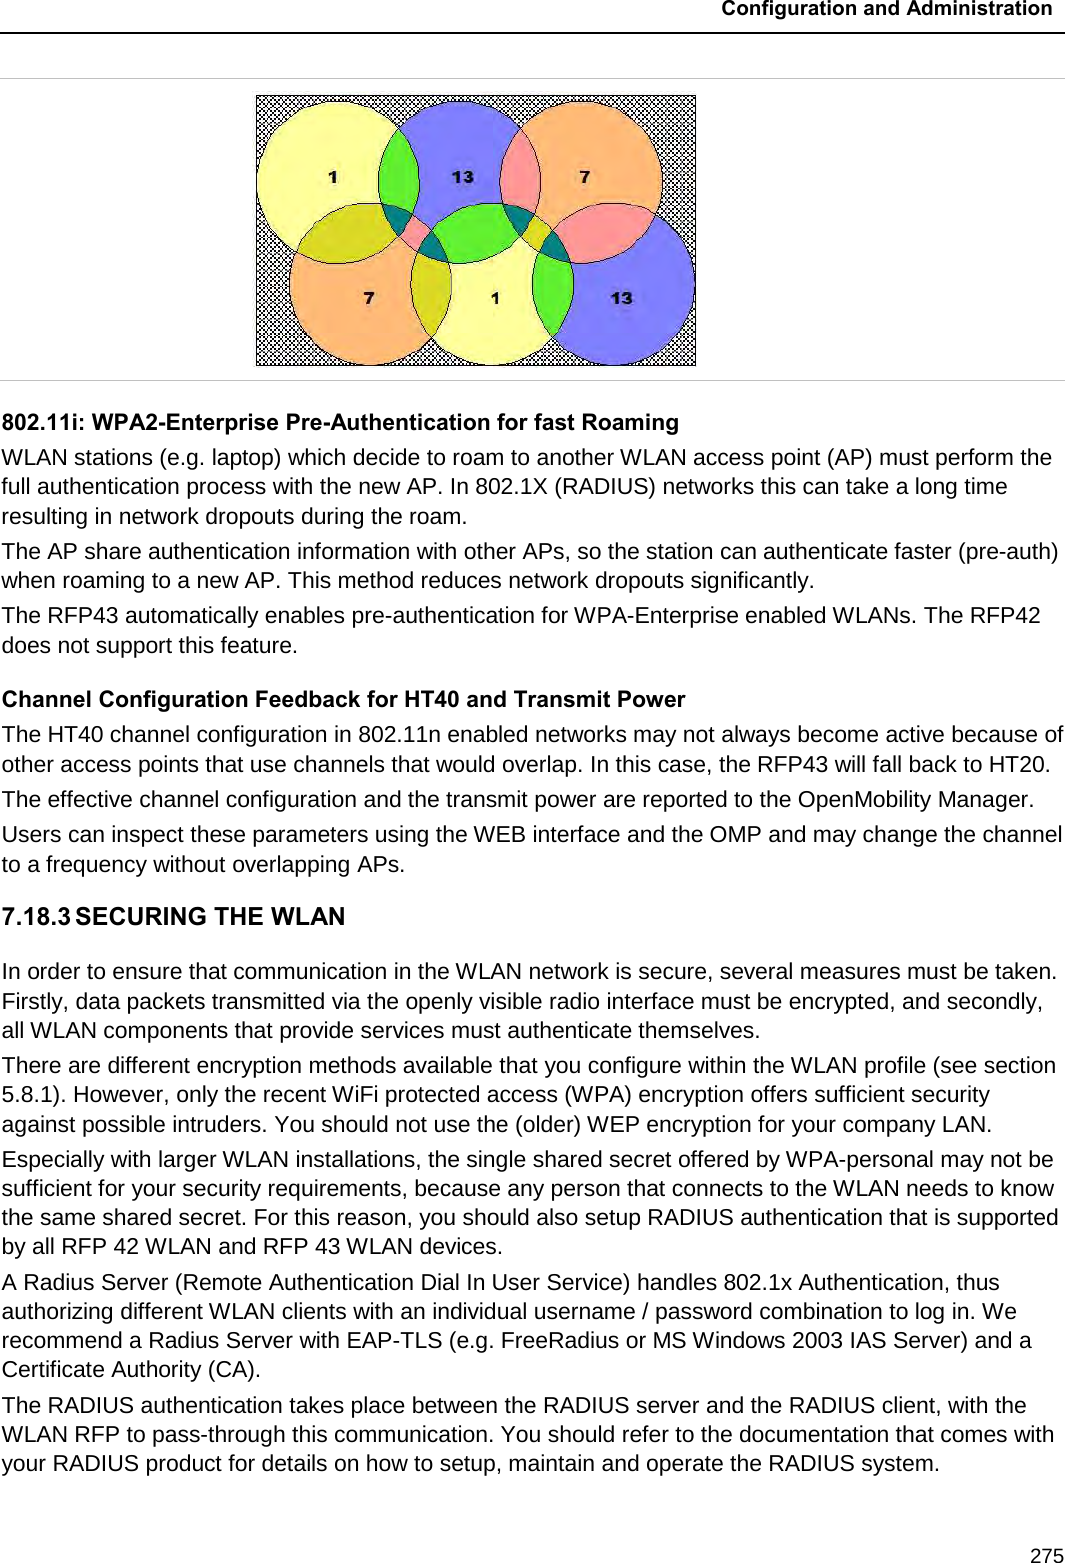  Configuration and Administration  275      802.11i: WPA2-Enterprise Pre-Authentication for fast Roaming WLAN stations (e.g. laptop) which decide to roam to another WLAN access point (AP) must perform the full authentication process with the new AP. In 802.1X (RADIUS) networks this can take a long time resulting in network dropouts during the roam. The AP share authentication information with other APs, so the station can authenticate faster (pre-auth) when roaming to a new AP. This method reduces network dropouts significantly. The RFP43 automatically enables pre-authentication for WPA-Enterprise enabled WLANs. The RFP42 does not support this feature. Channel Configuration Feedback for HT40 and Transmit Power The HT40 channel configuration in 802.11n enabled networks may not always become active because of other access points that use channels that would overlap. In this case, the RFP43 will fall back to HT20. The effective channel configuration and the transmit power are reported to the OpenMobility Manager. Users can inspect these parameters using the WEB interface and the OMP and may change the channel to a frequency without overlapping APs. 7.18.3 SECURING THE WLAN In order to ensure that communication in the WLAN network is secure, several measures must be taken. Firstly, data packets transmitted via the openly visible radio interface must be encrypted, and secondly, all WLAN components that provide services must authenticate themselves. There are different encryption methods available that you configure within the WLAN profile (see section 5.8.1). However, only the recent WiFi protected access (WPA) encryption offers sufficient security against possible intruders. You should not use the (older) WEP encryption for your company LAN. Especially with larger WLAN installations, the single shared secret offered by WPA-personal may not be sufficient for your security requirements, because any person that connects to the WLAN needs to know the same shared secret. For this reason, you should also setup RADIUS authentication that is supported by all RFP 42 WLAN and RFP 43 WLAN devices. A Radius Server (Remote Authentication Dial In User Service) handles 802.1x Authentication, thus authorizing different WLAN clients with an individual username / password combination to log in. We recommend a Radius Server with EAP-TLS (e.g. FreeRadius or MS Windows 2003 IAS Server) and a Certificate Authority (CA).  The RADIUS authentication takes place between the RADIUS server and the RADIUS client, with the WLAN RFP to pass-through this communication. You should refer to the documentation that comes with your RADIUS product for details on how to setup, maintain and operate the RADIUS system.  